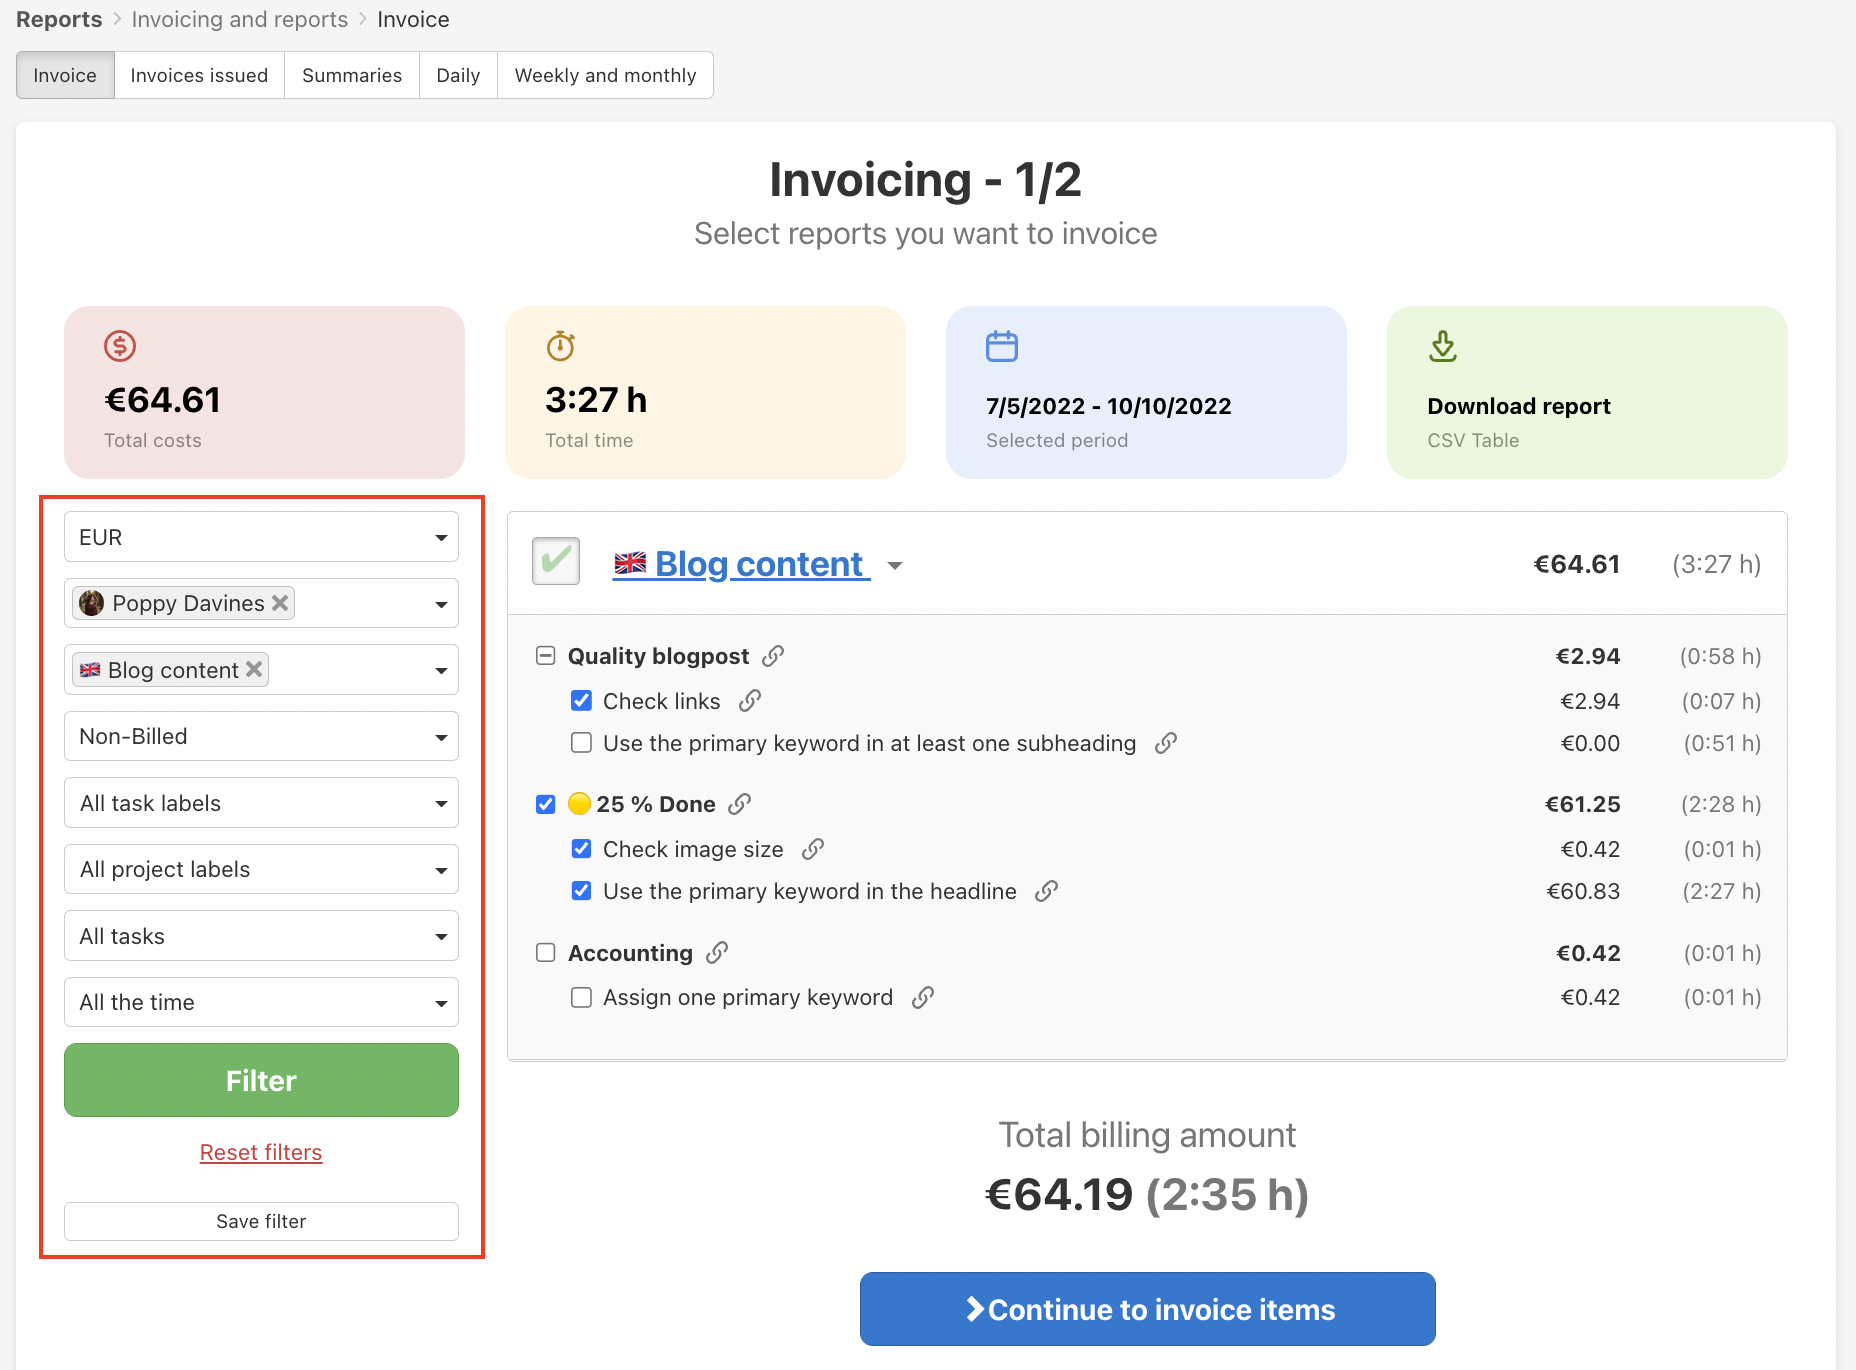 You can filter the tasks to invoice.